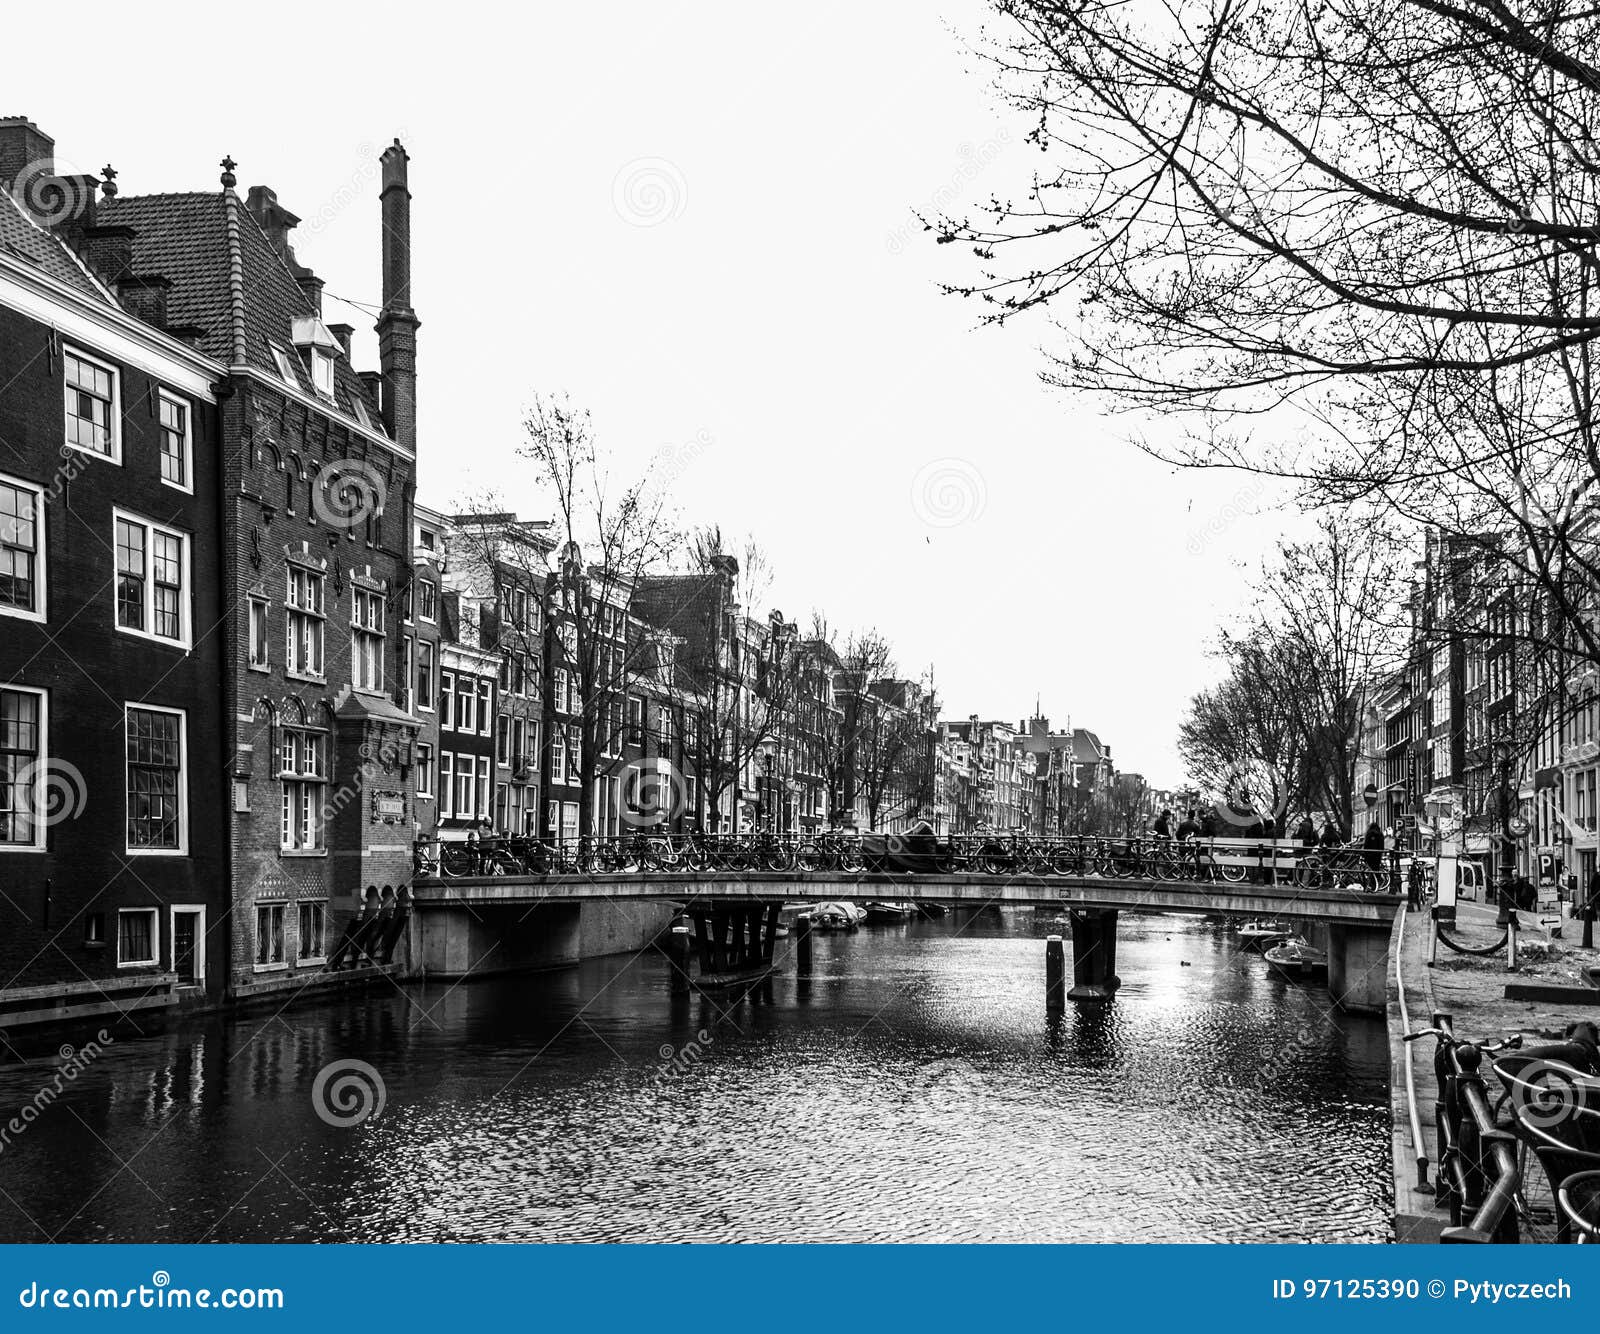 water canal, aka gracht, and narrow houses along it in amsterdam city centre, netherlands, black and white image